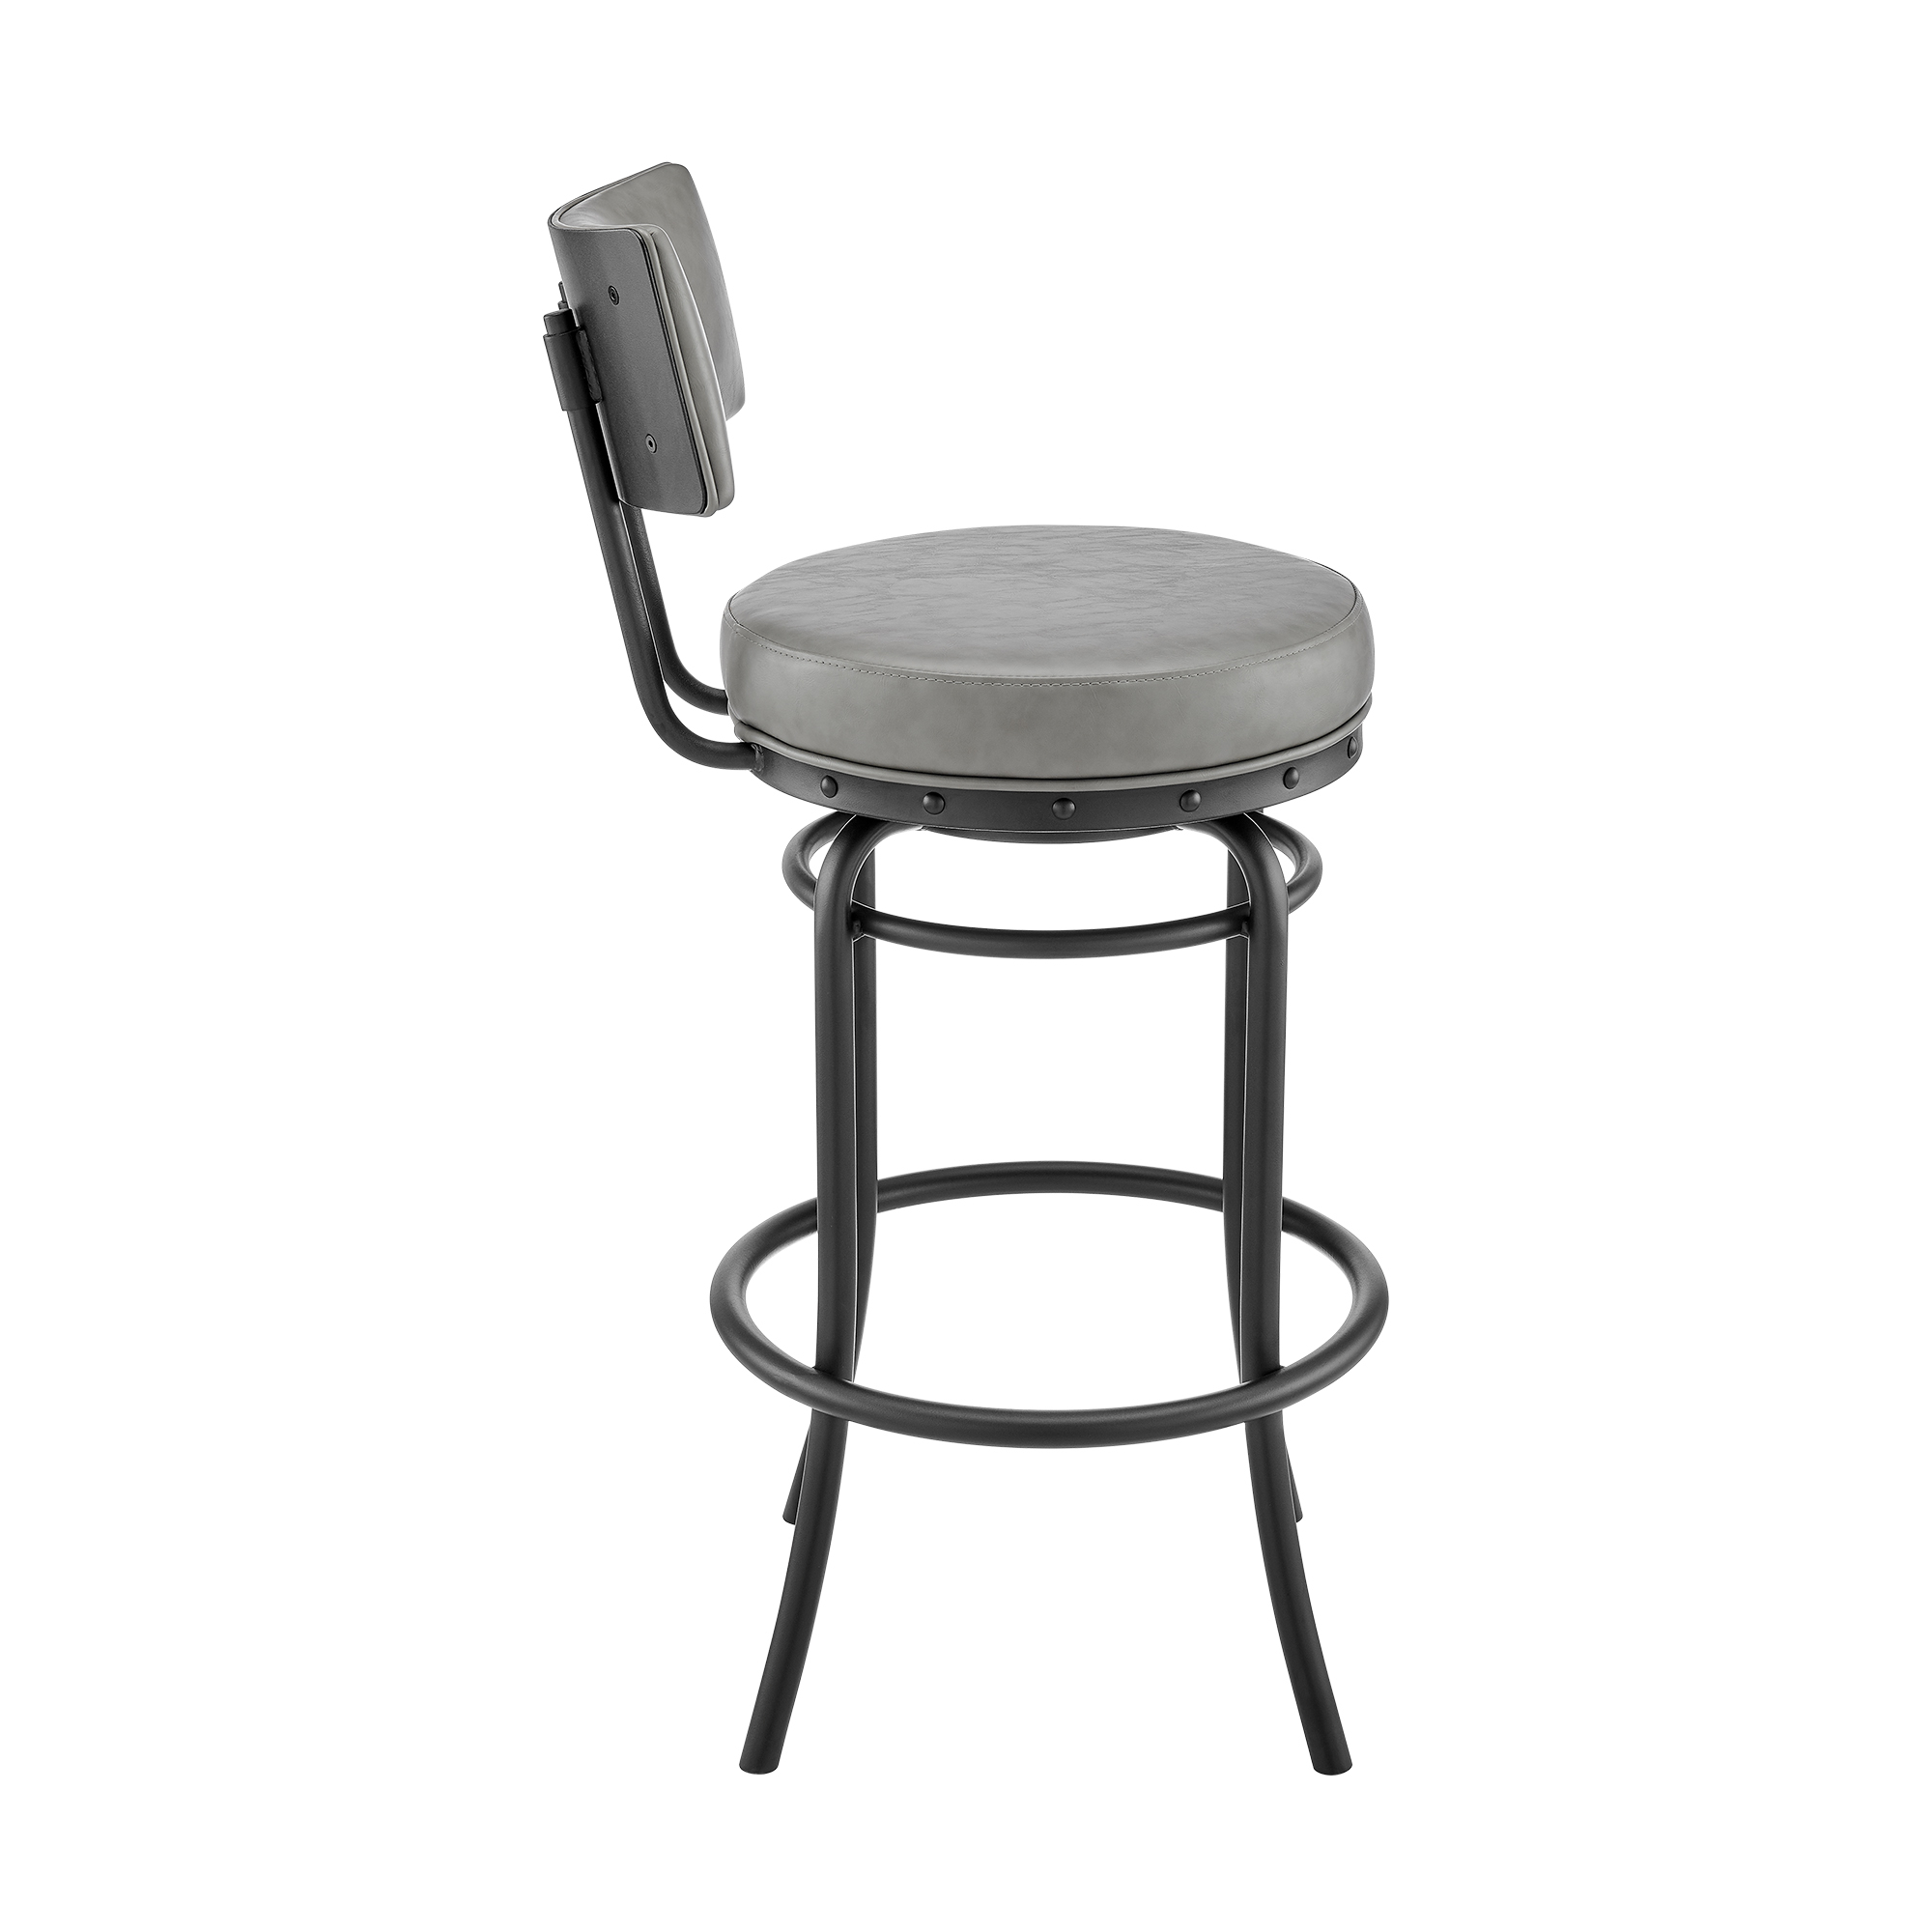 Felicity 26 Inch Swivel Counter Stool Chair, Round Gray Faux Leather Seat- Saltoro Sherpi